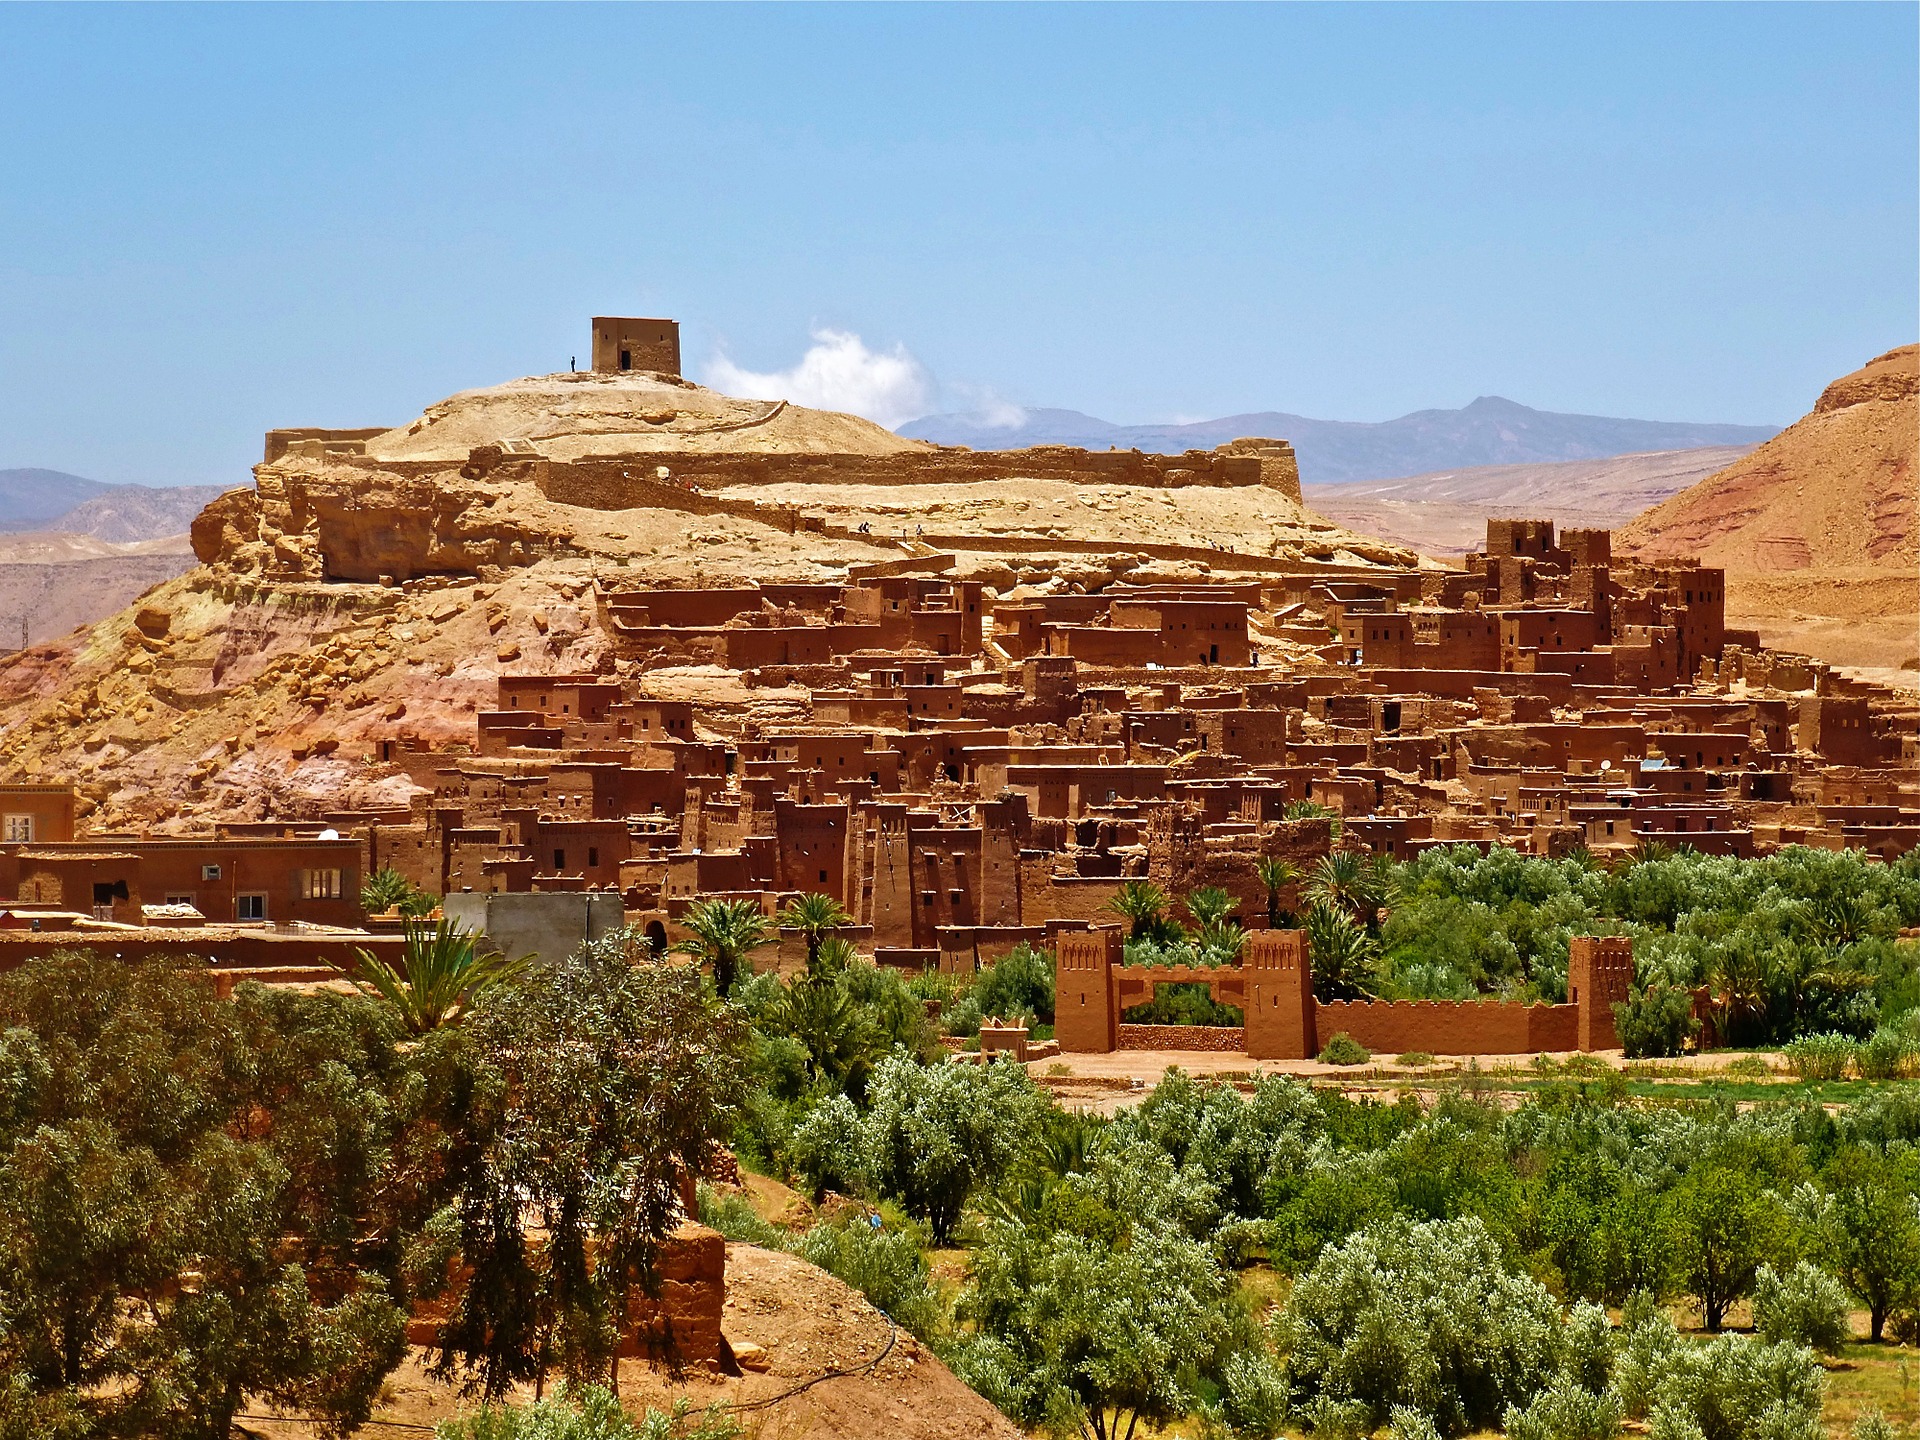 12 days Morocco New Year tour from Marrakech to visit Chefchaouen, Royal cities and Merzouga desert